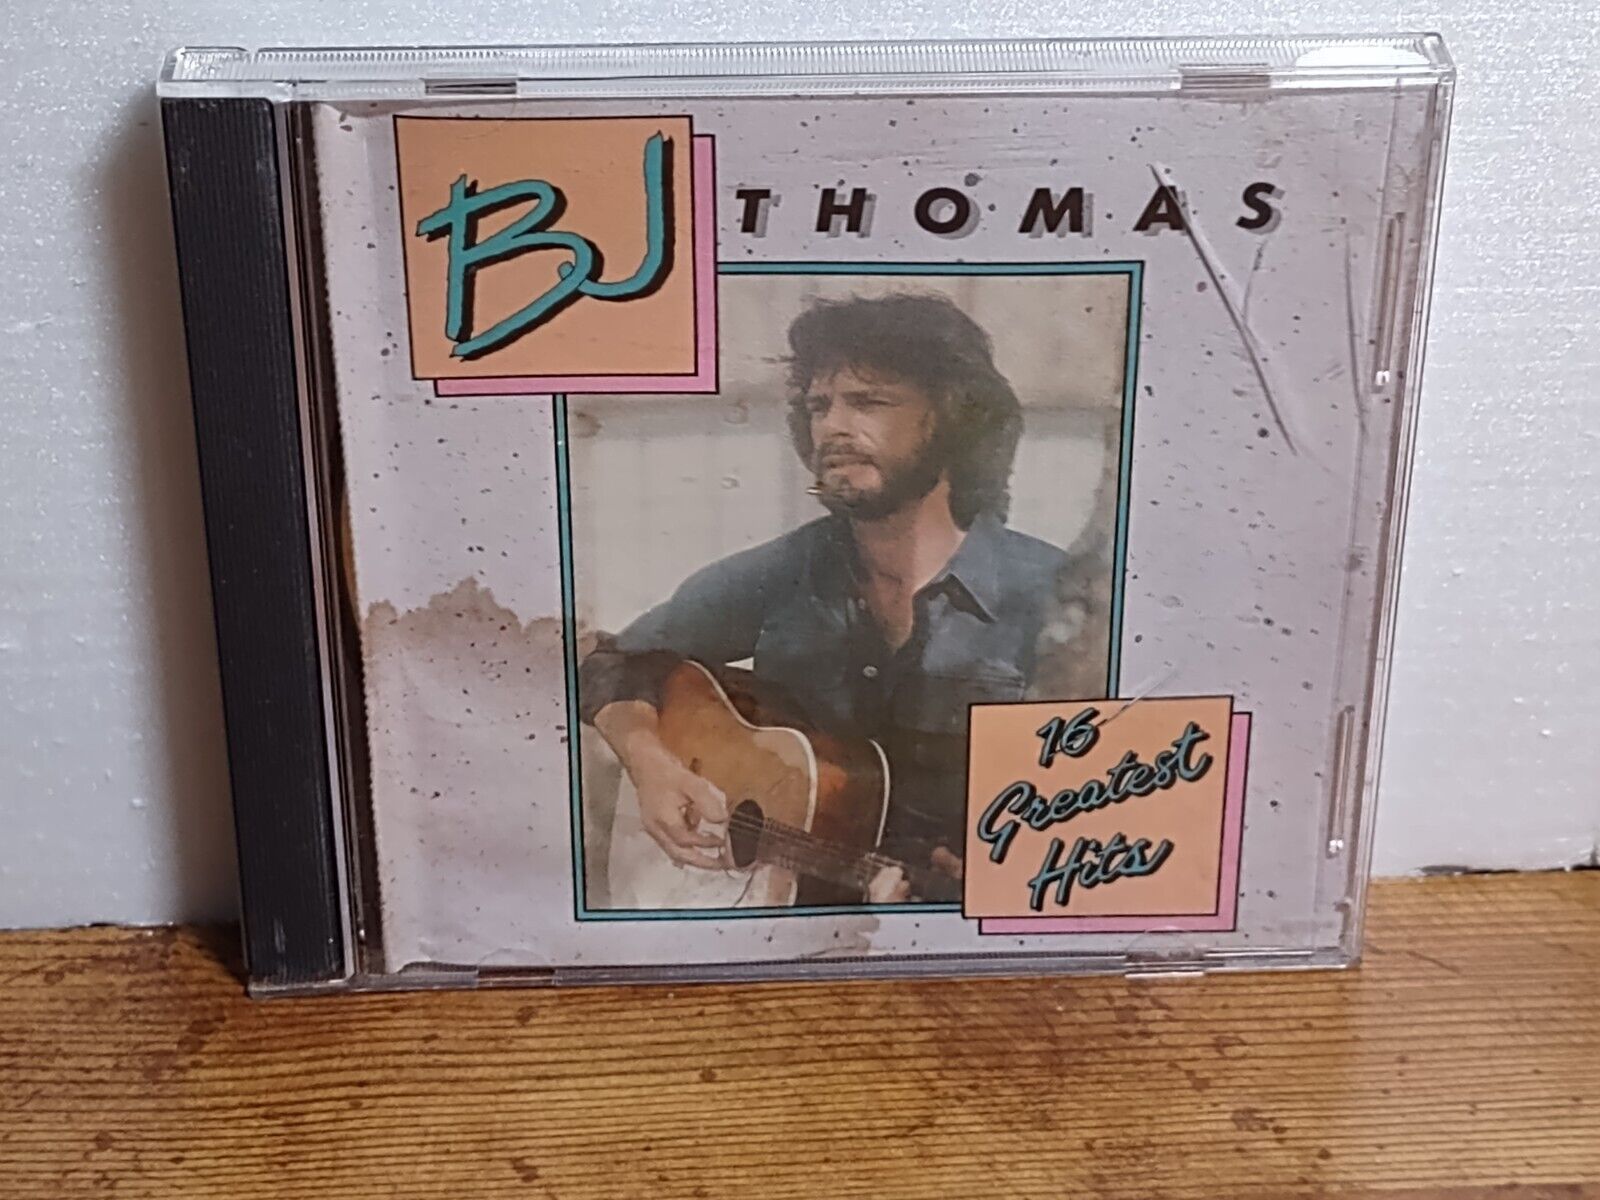 16 Greatest Hits [Deluxe] by B.J. Thomas (CD, Apr-1995, Deluxe)